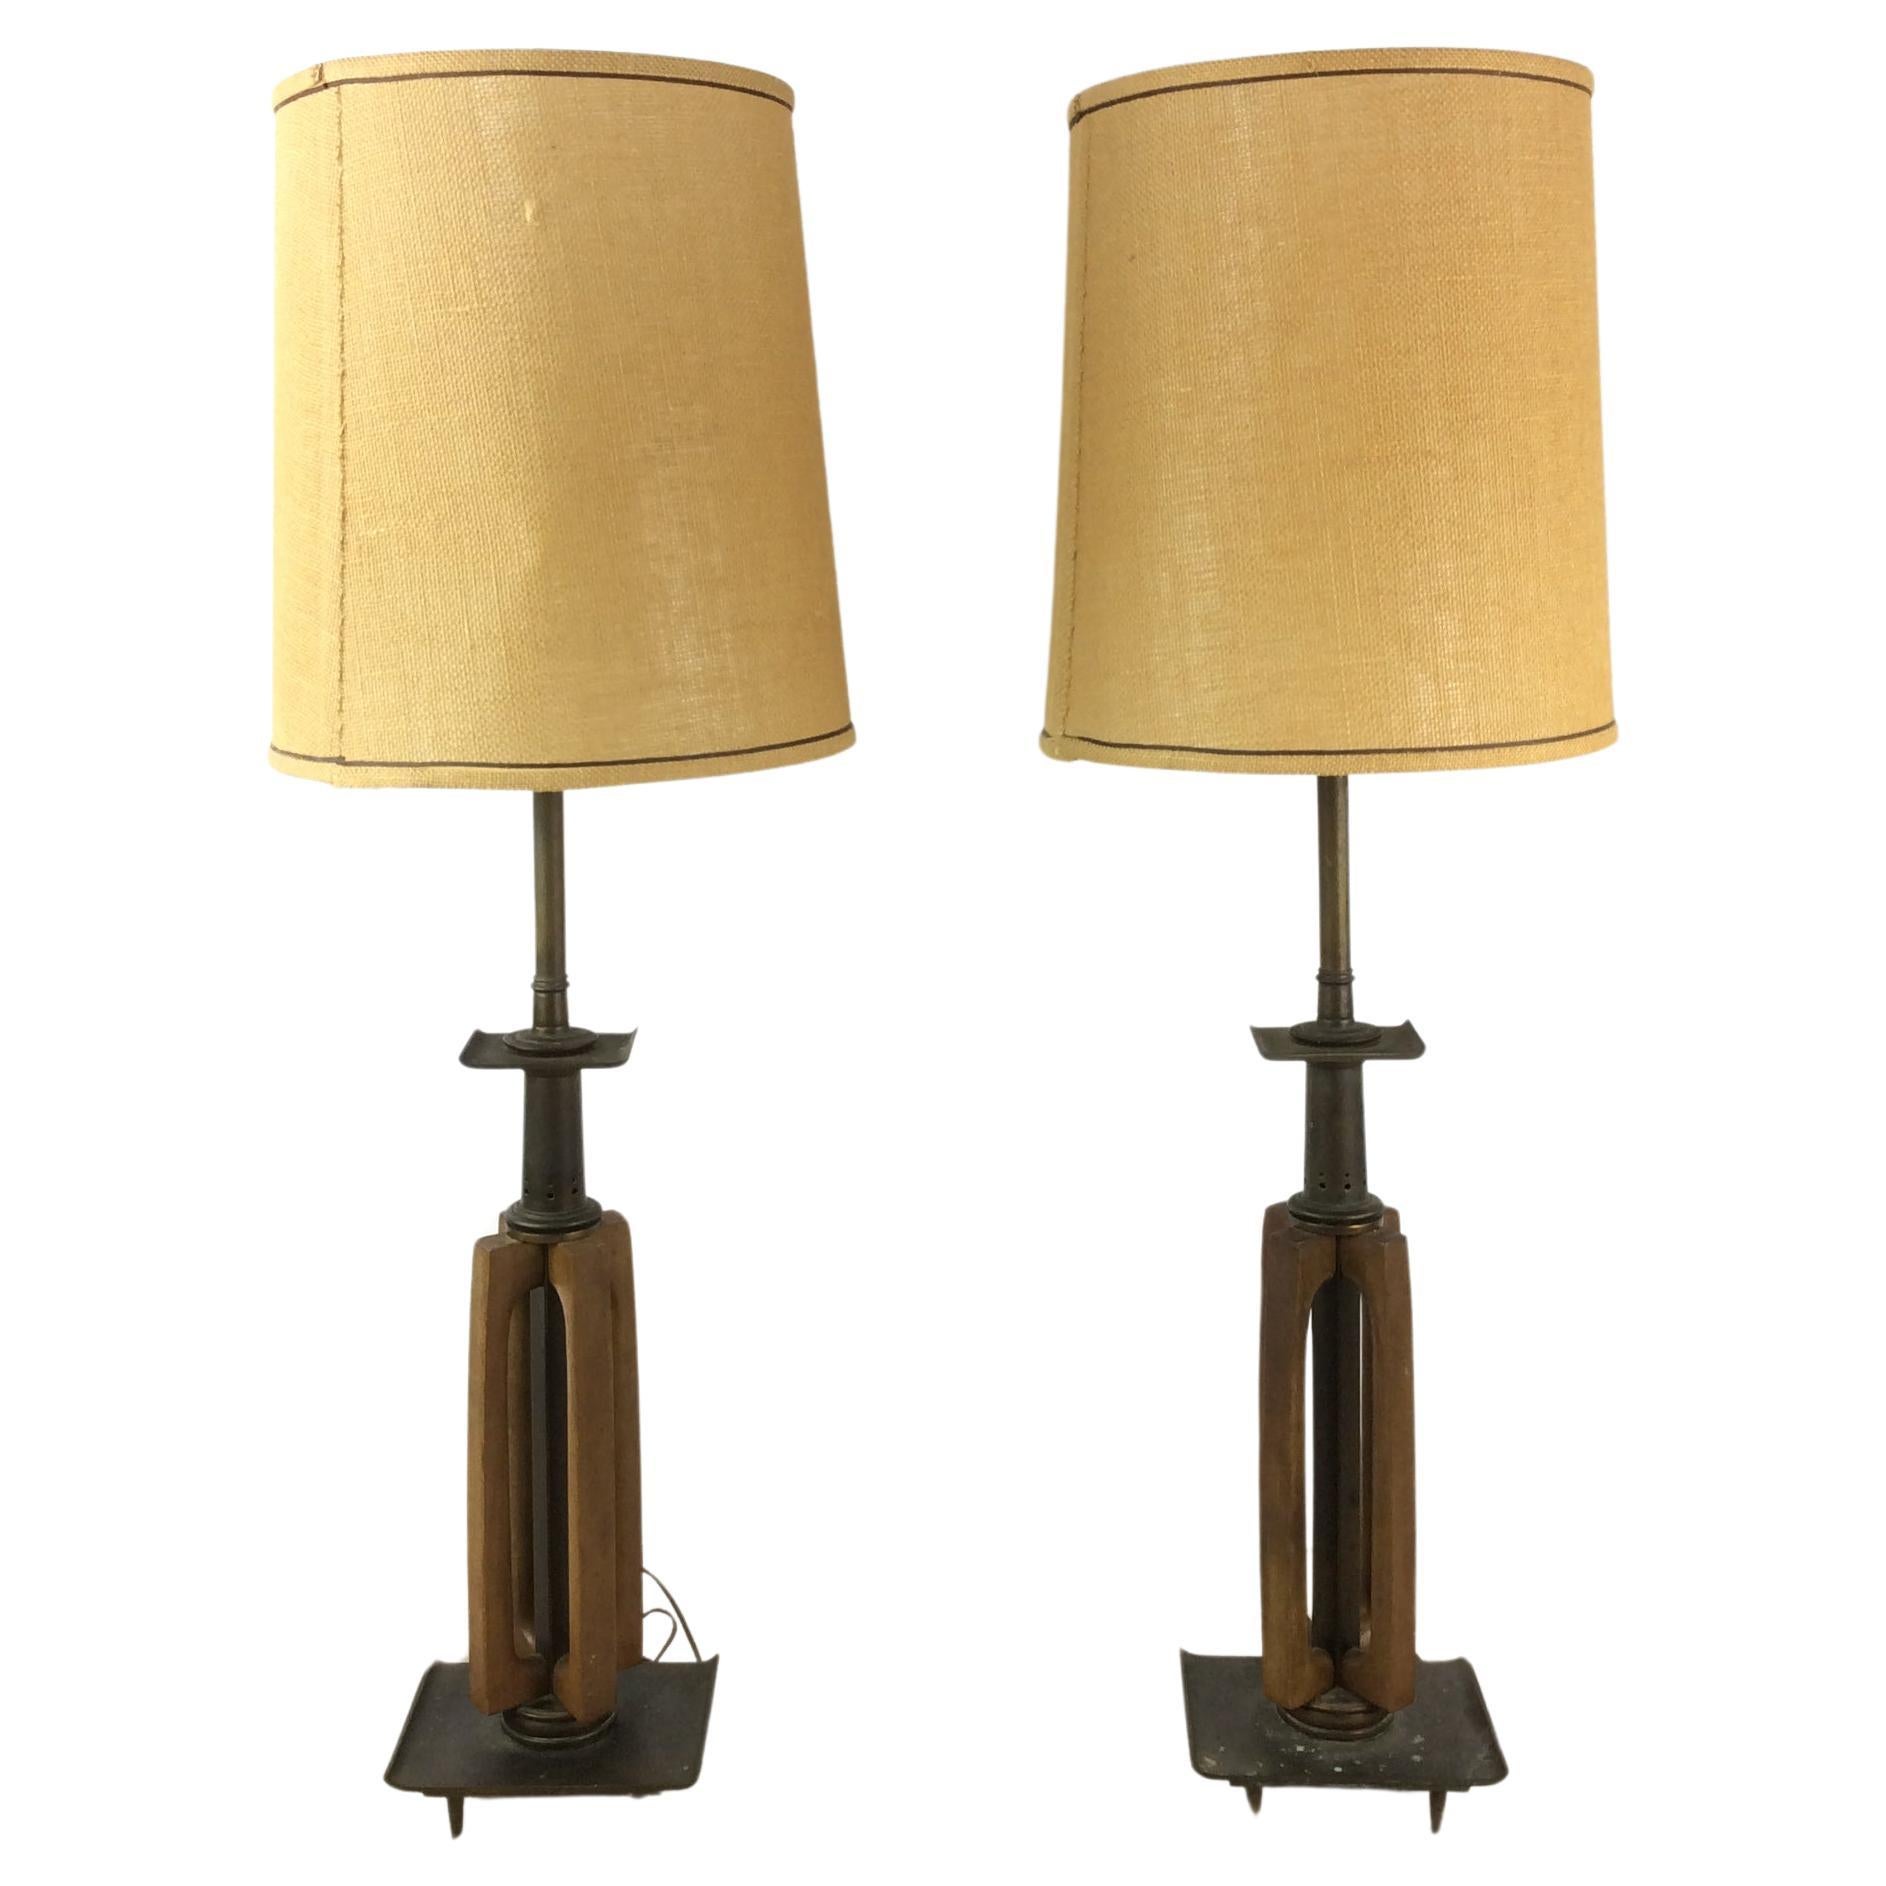 Pair of Tall Mid Century Modern Brass & Walnut Table Lamps For Sale